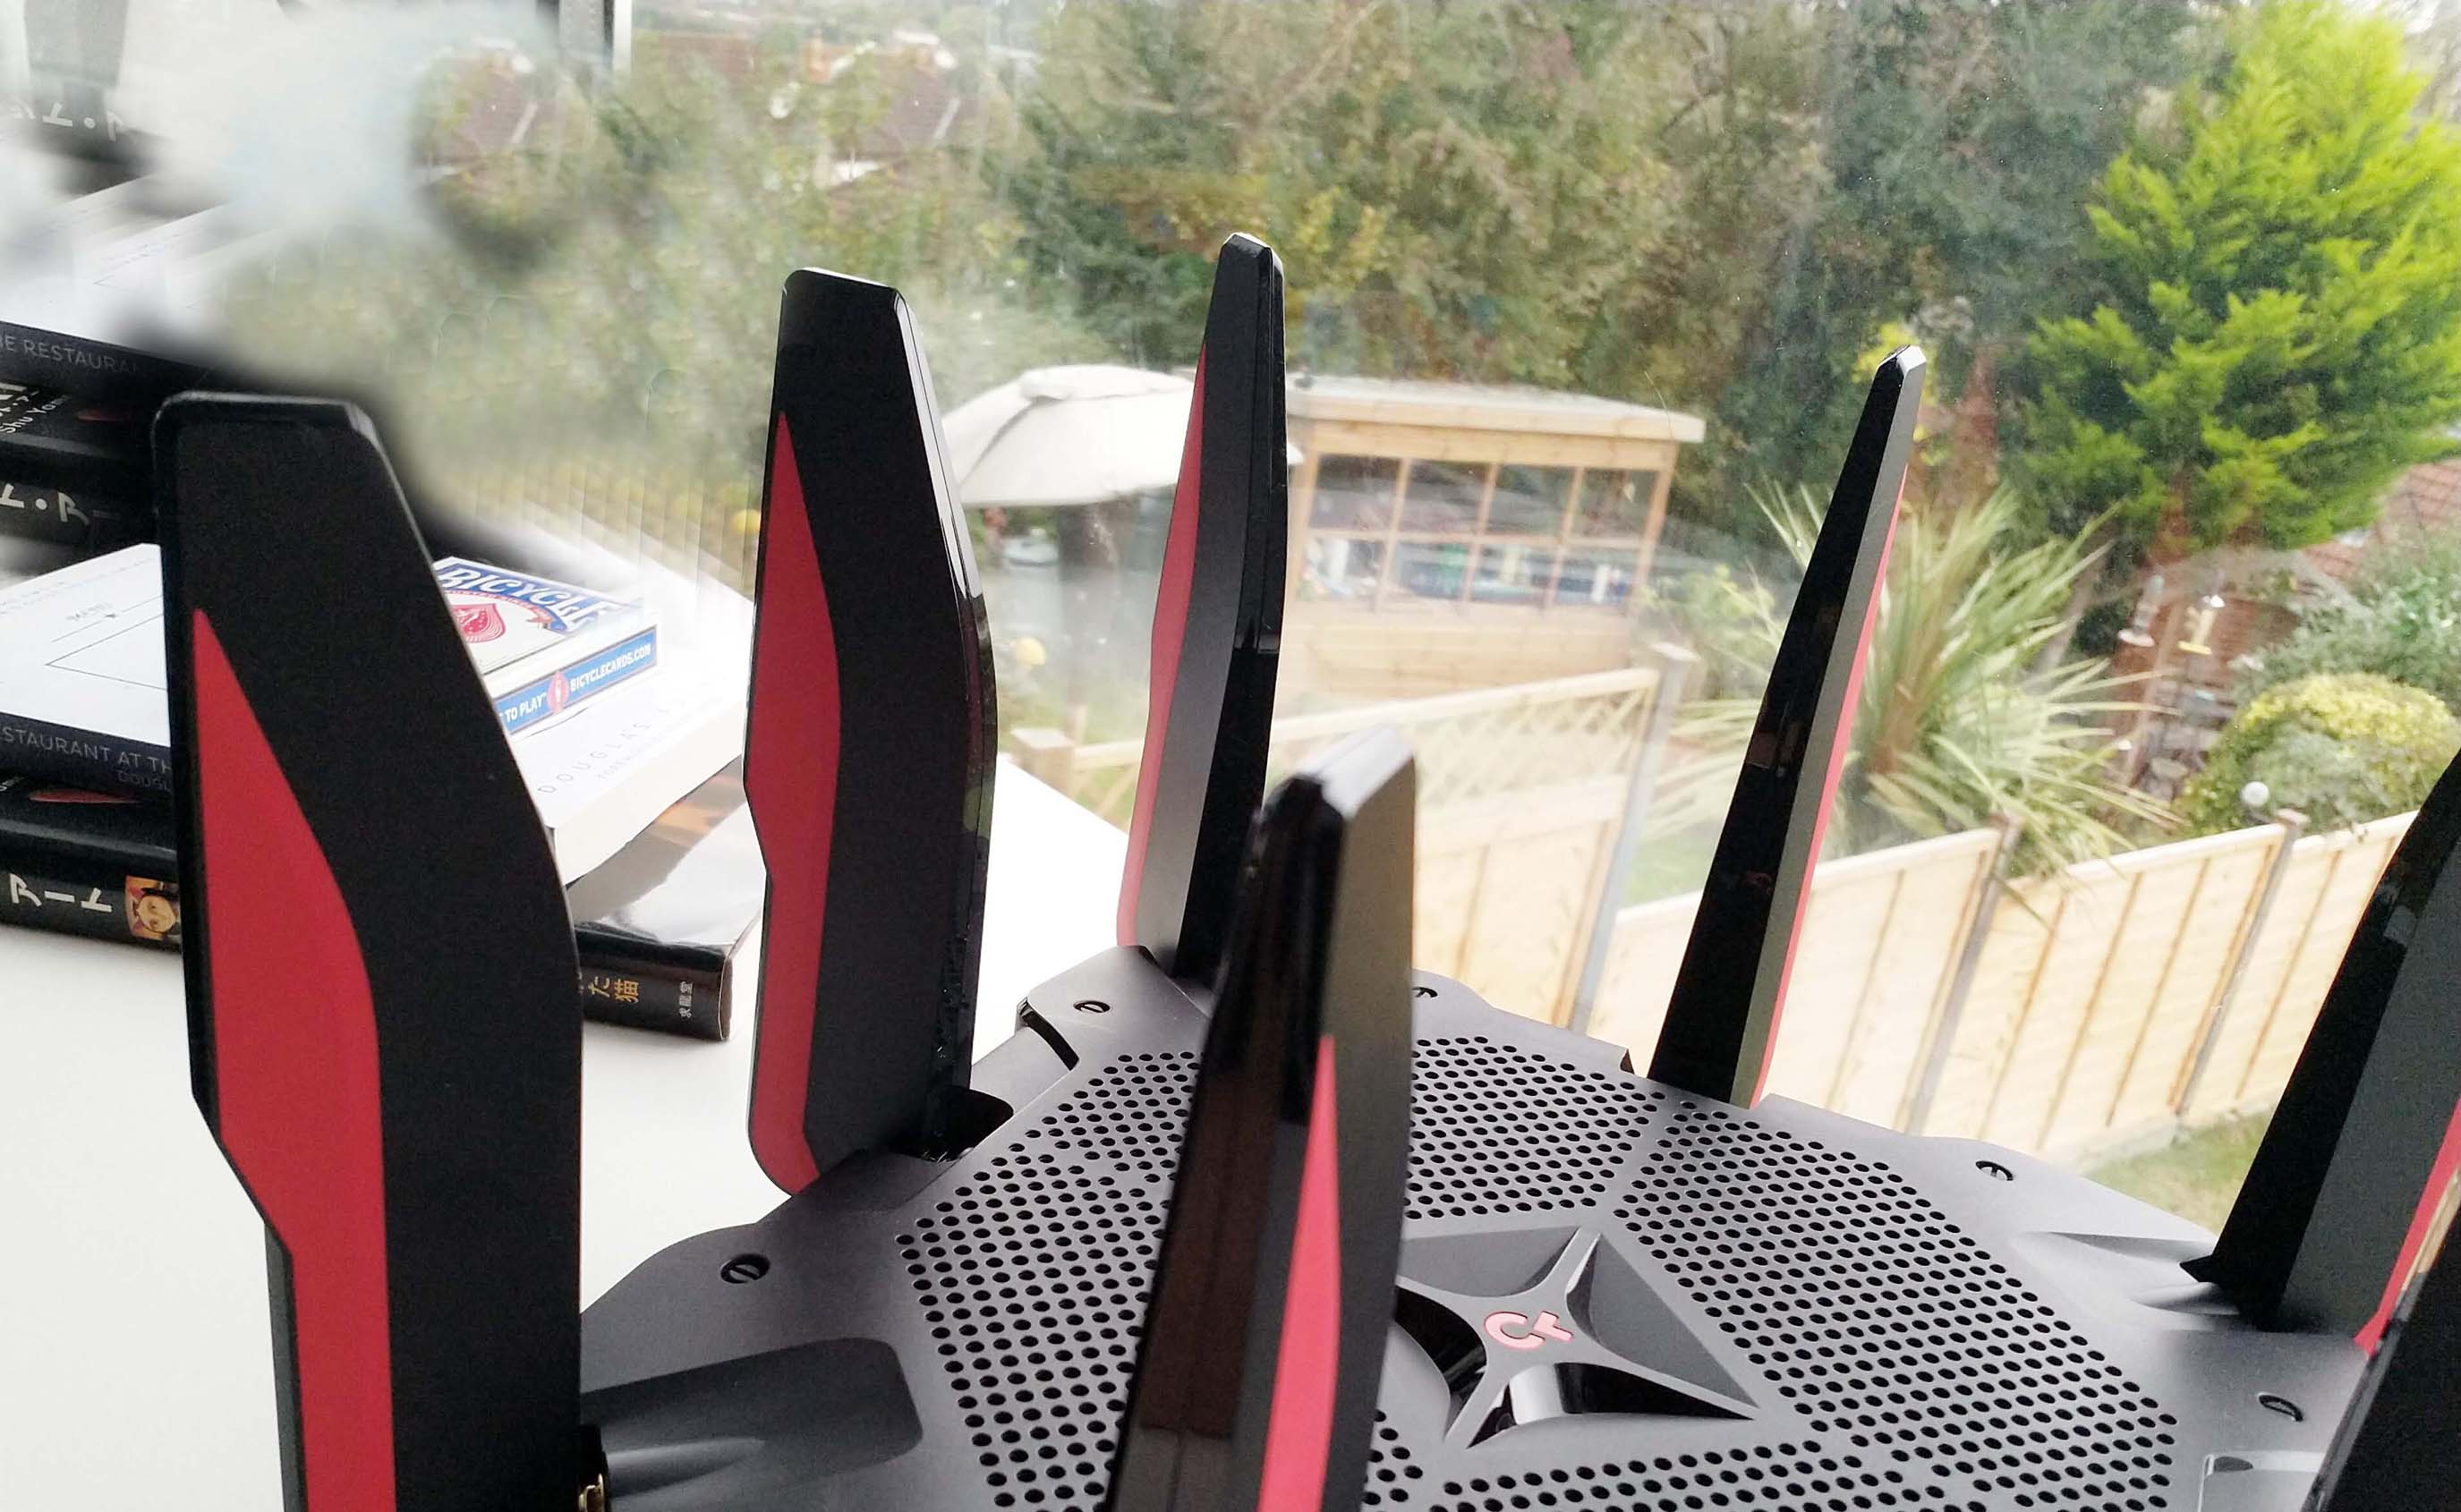 Gaming routers